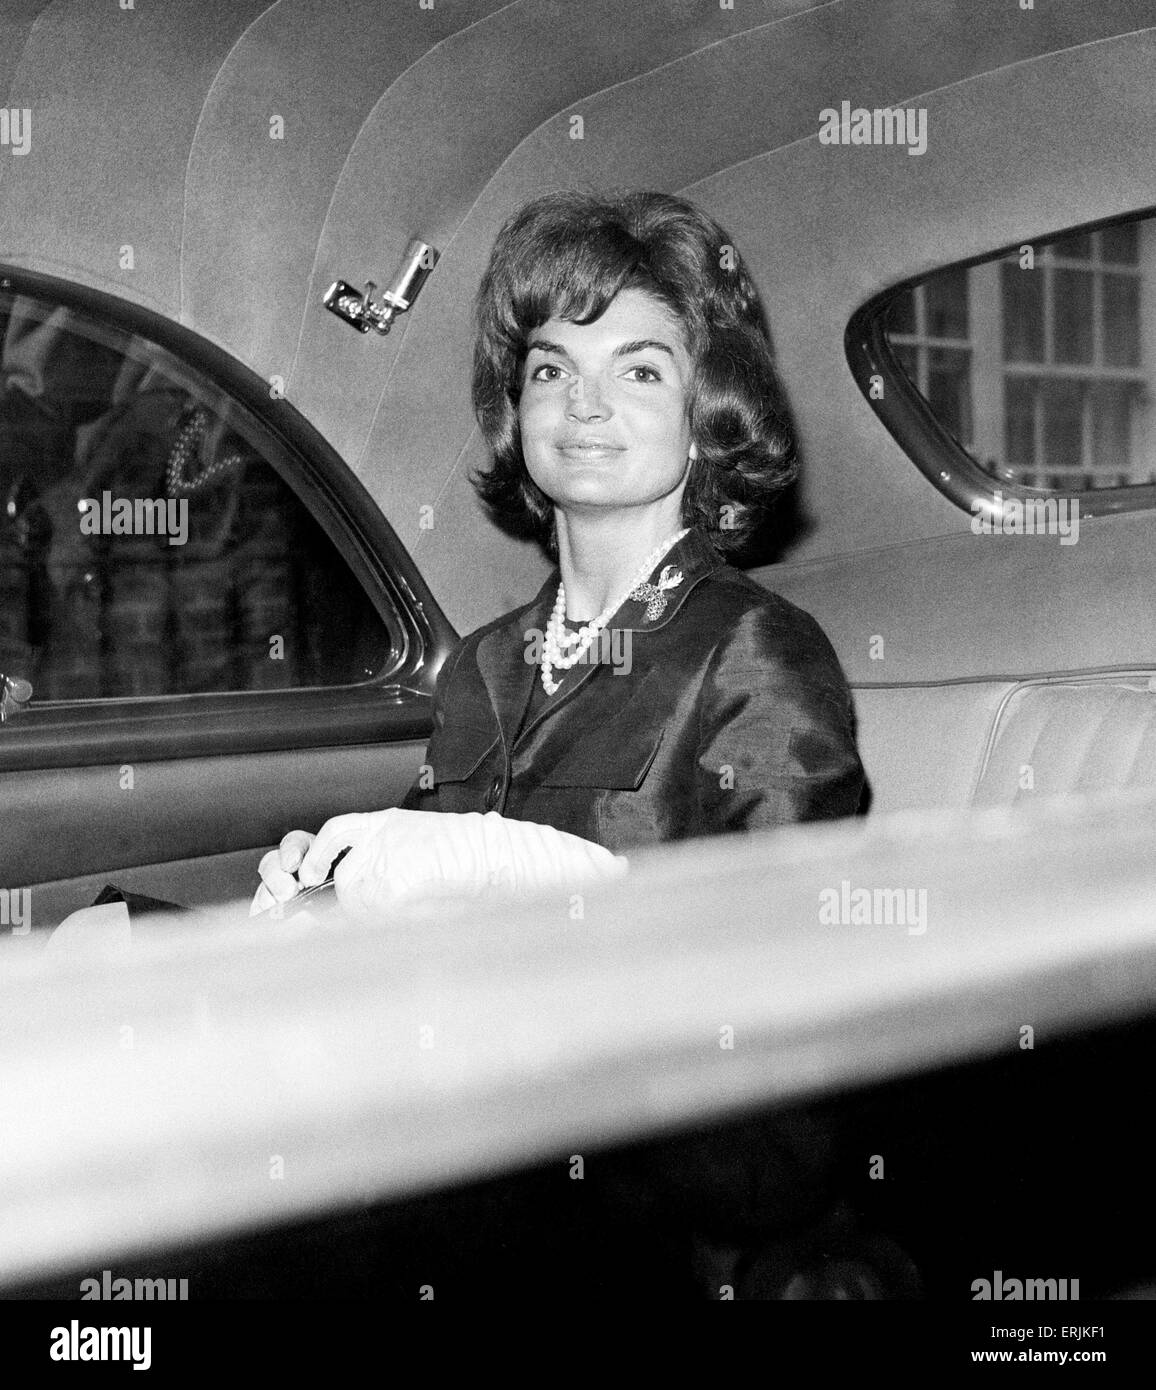 Second day of the visit of American President John F Kennedy and his wife Jackie to London, England.  The First Lady Jacqueline Kennedy leaving the London residence of her sister for Buckingham Palace. 5th June 1961. Stock Photo